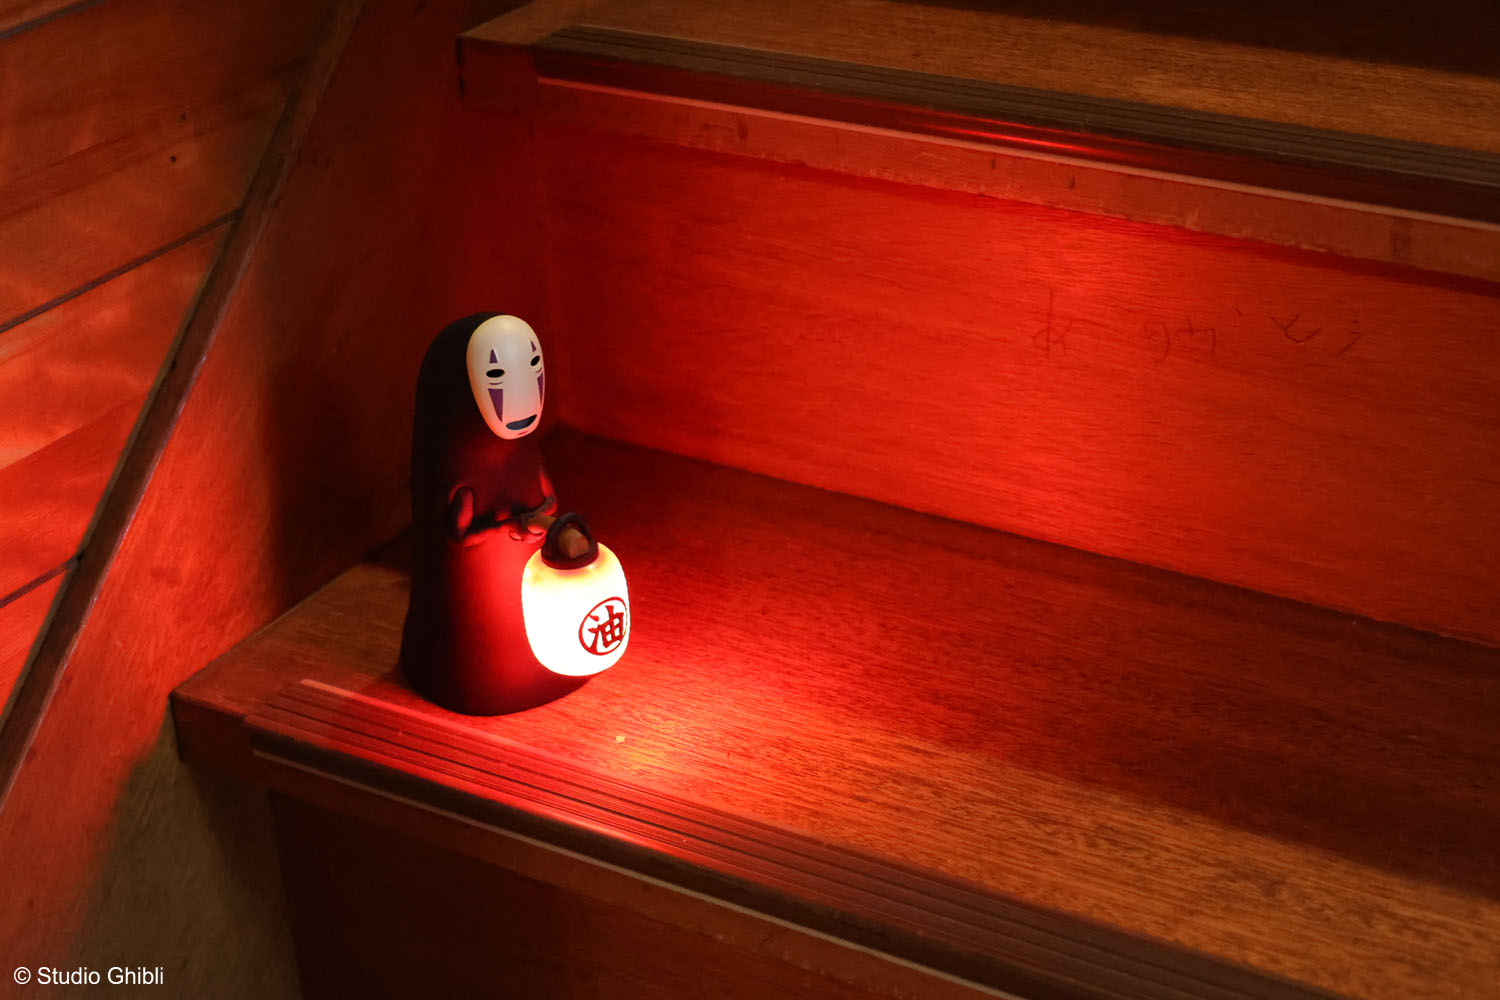 No Face lights the way in new lineup of 'Spirited Away' anime merchandise  from Japan - Japan Today